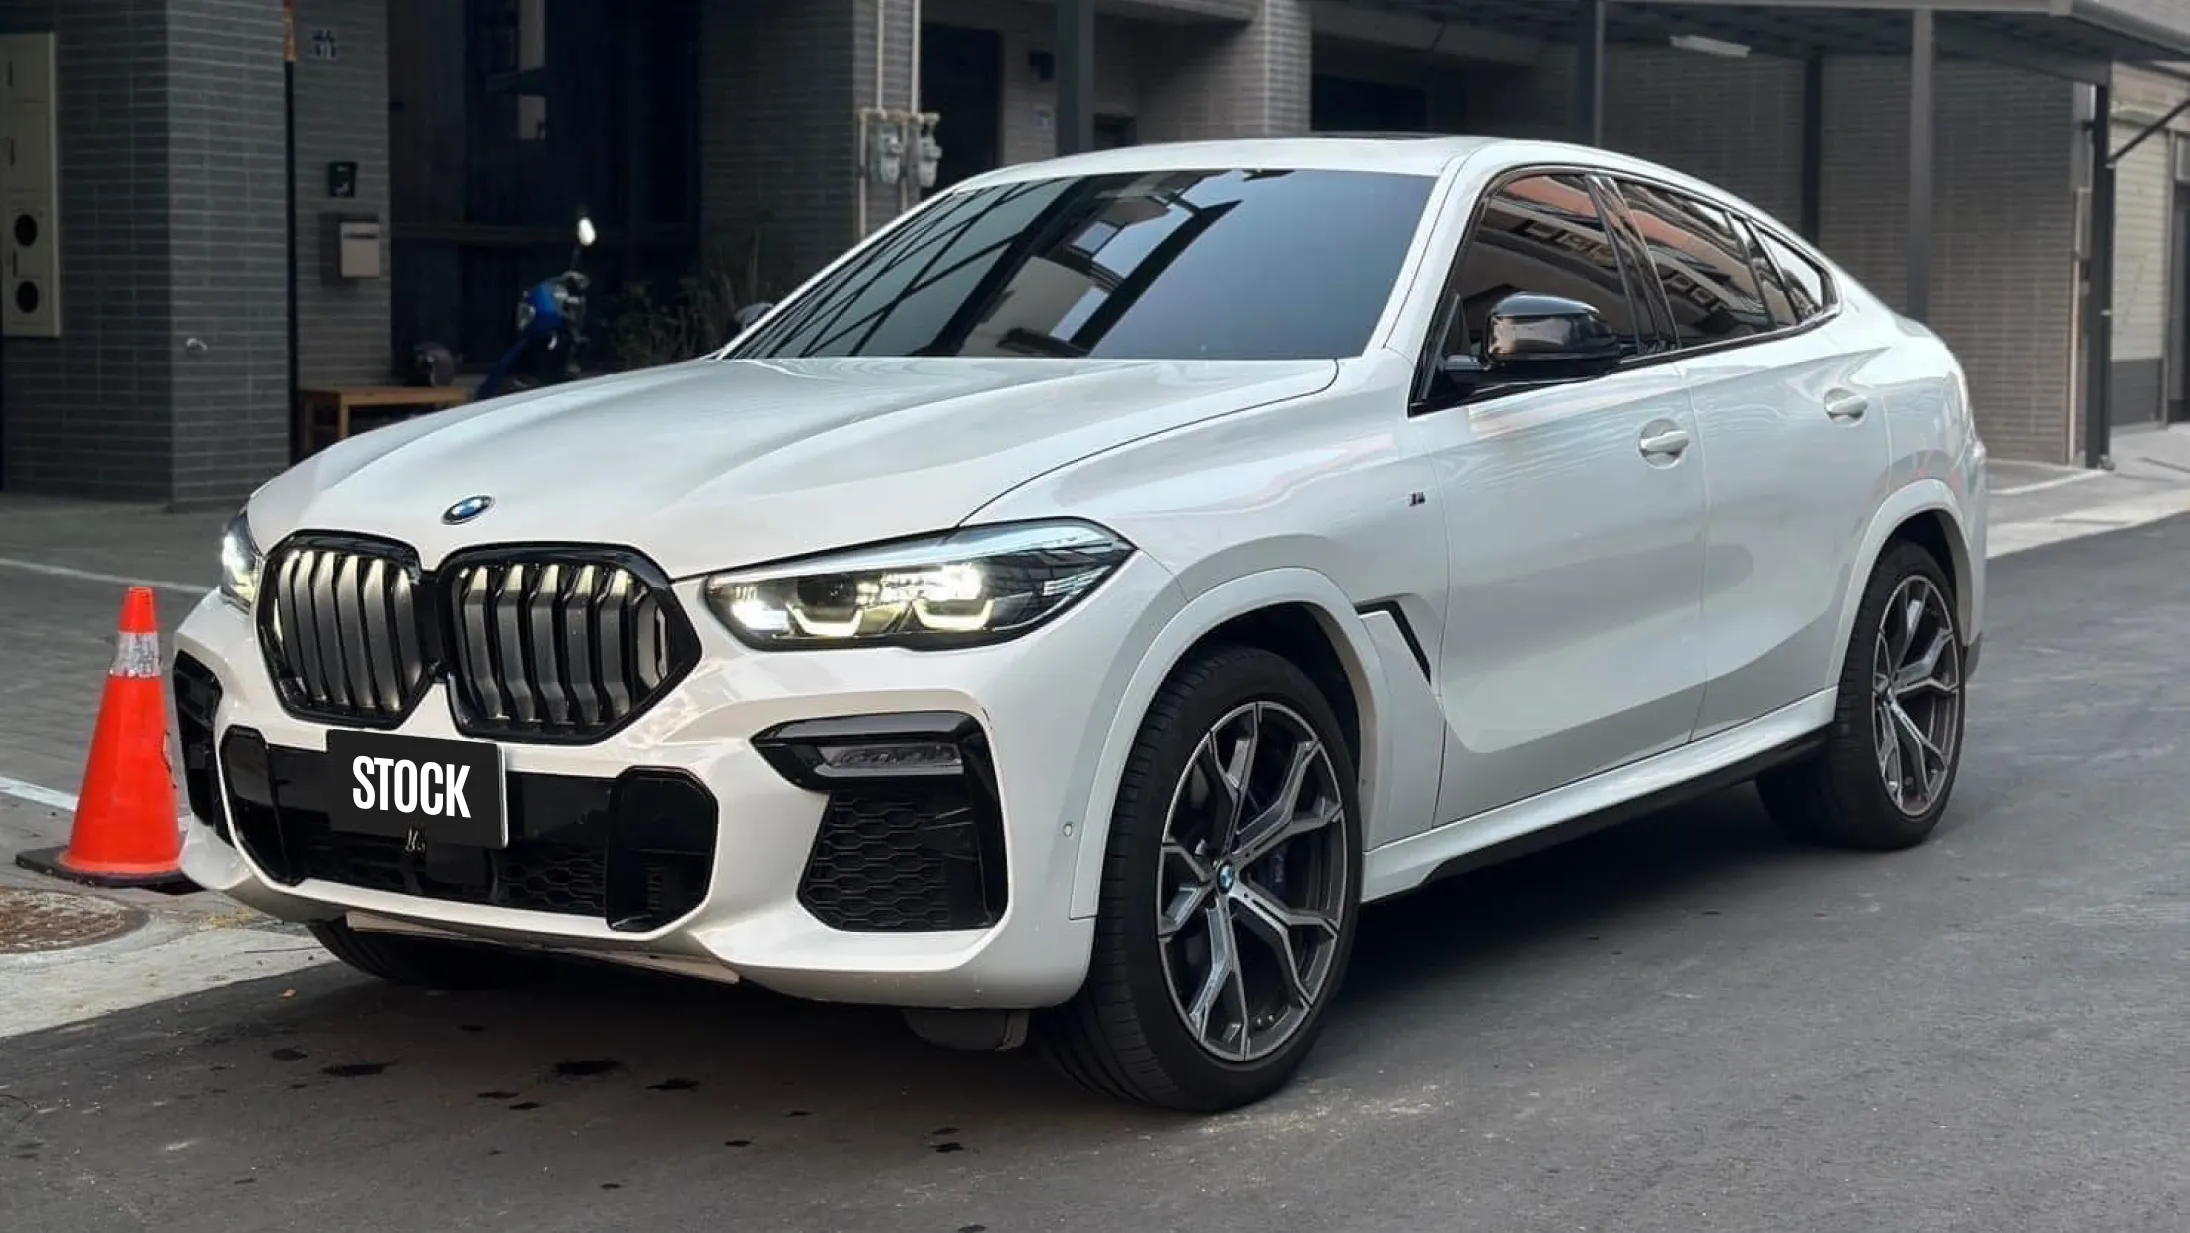 Front angle view on a BMW X6 with a body kit giving the car a custom appearance